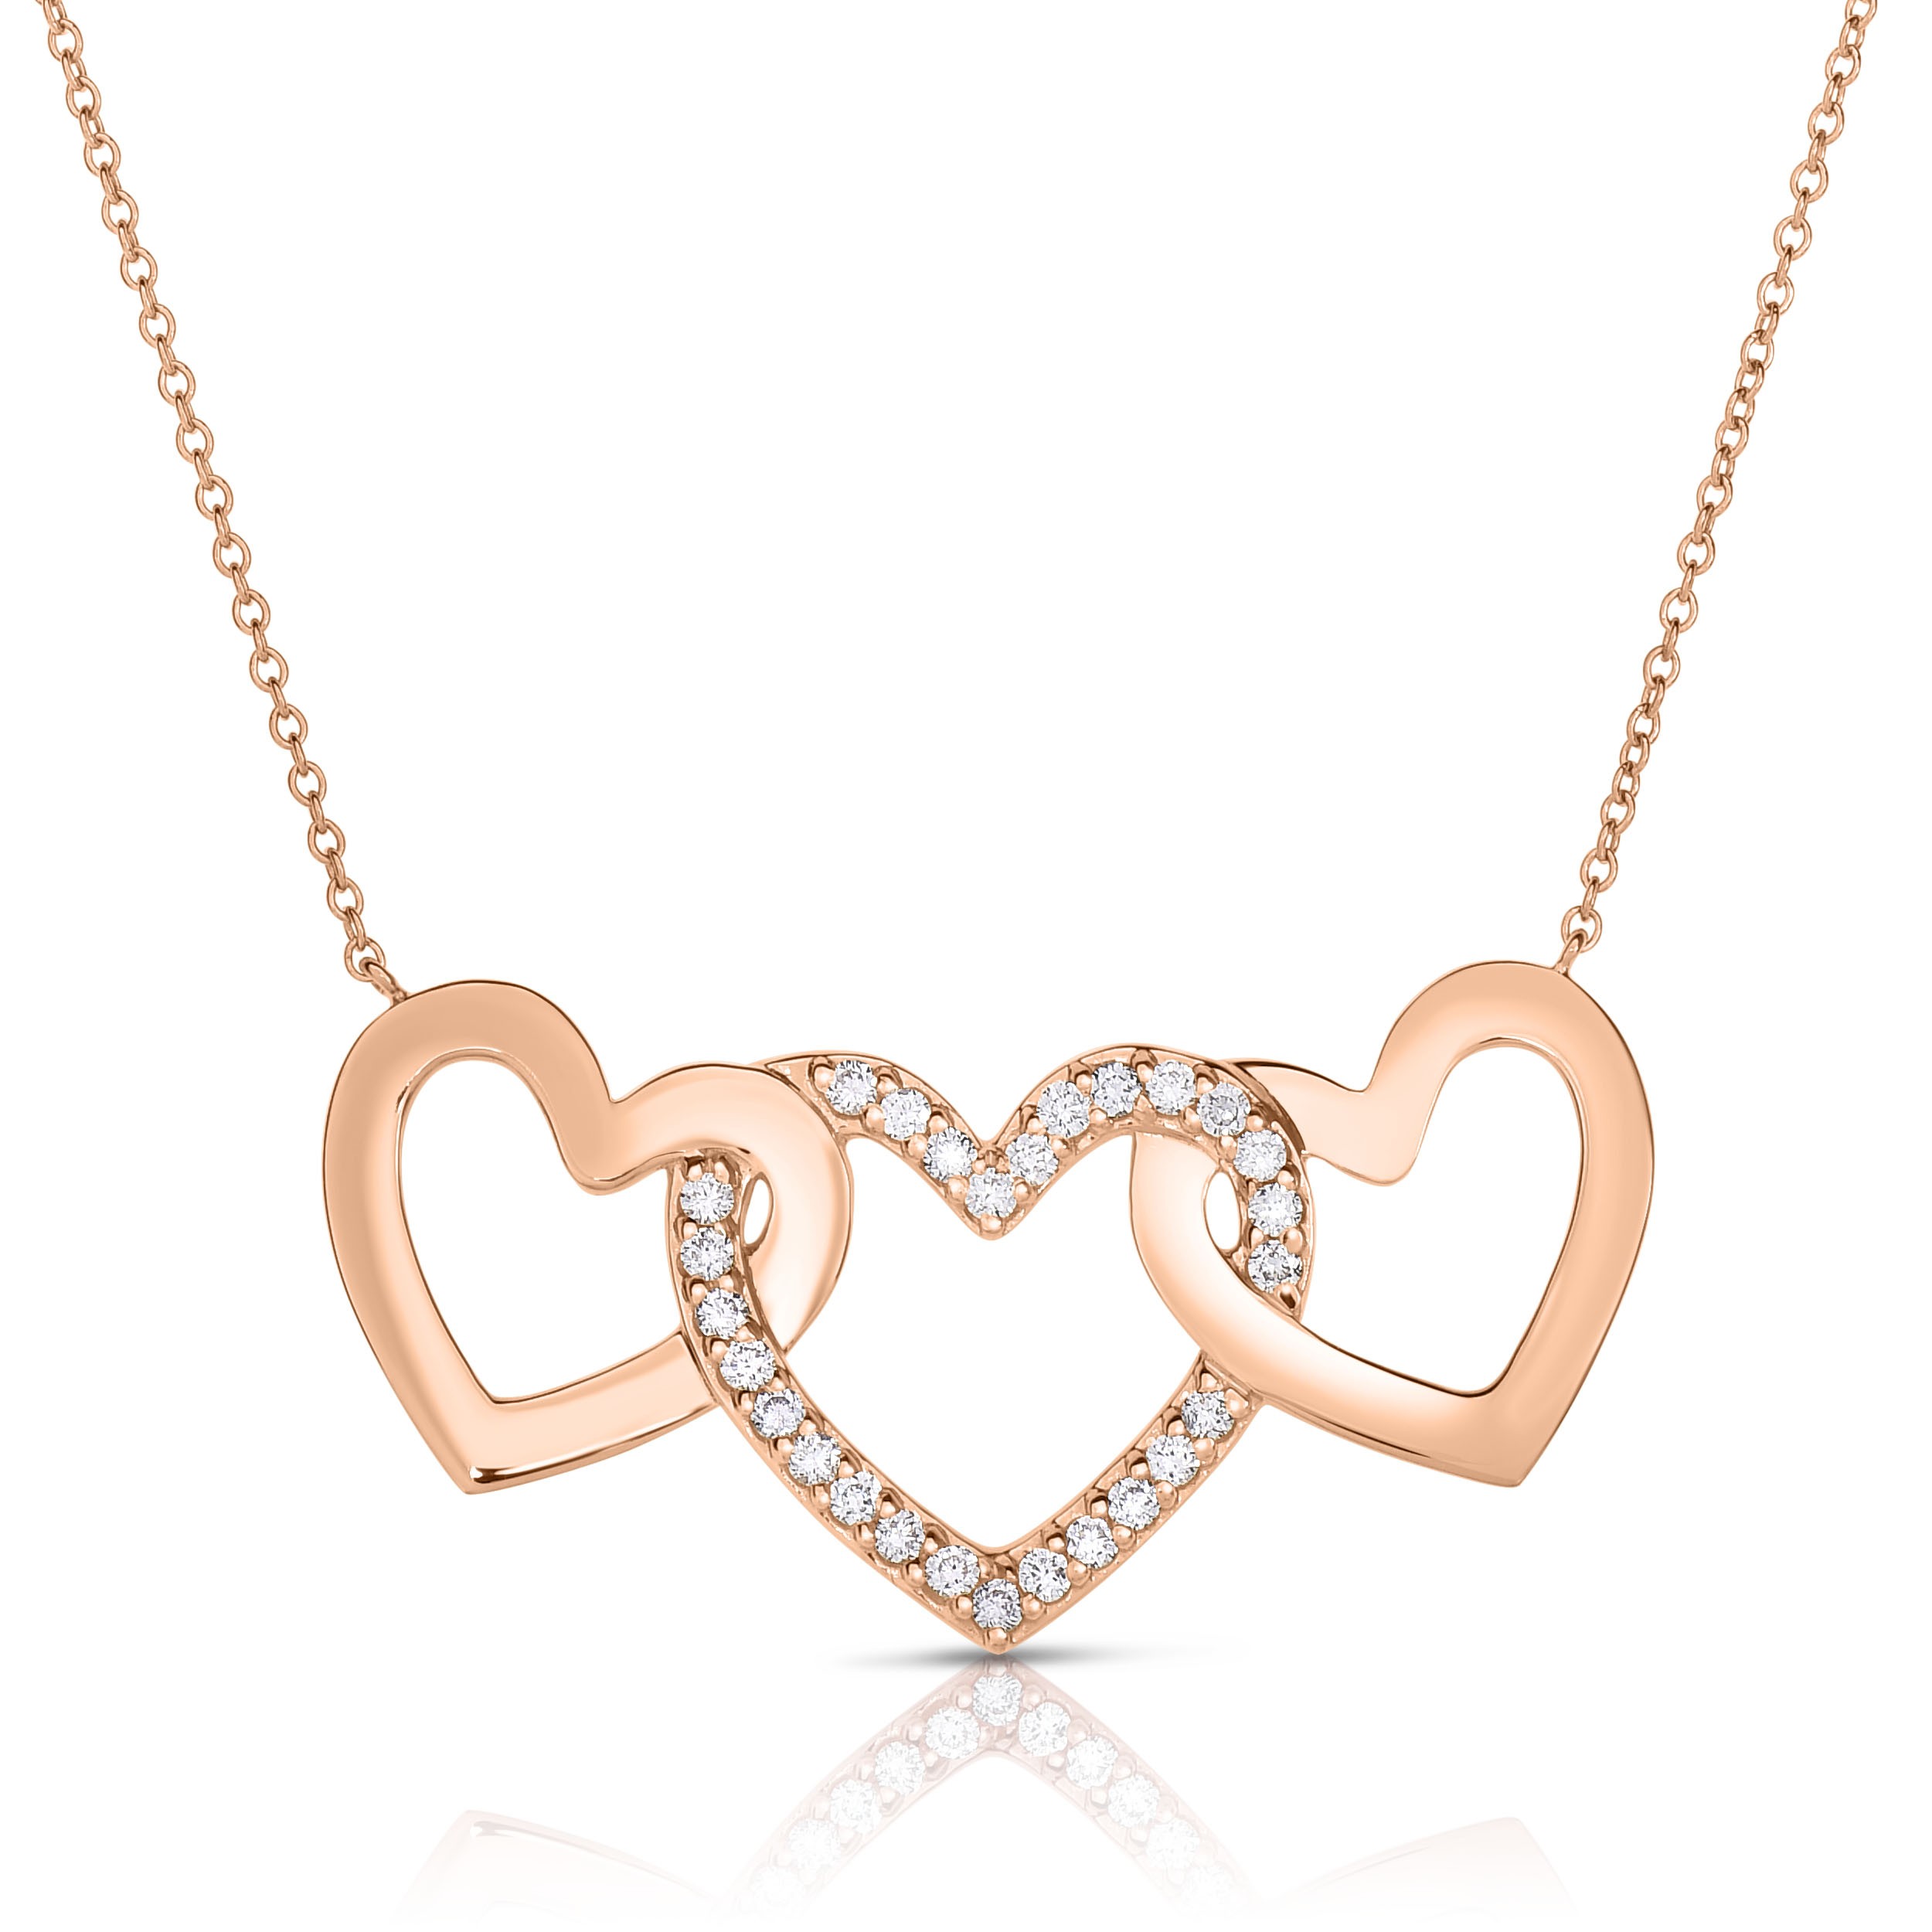 18K Rose Gold 3 Hearts Love Bonds Necklace with Lab-Grown Diamonds on AIDIA Extendable Link Chain